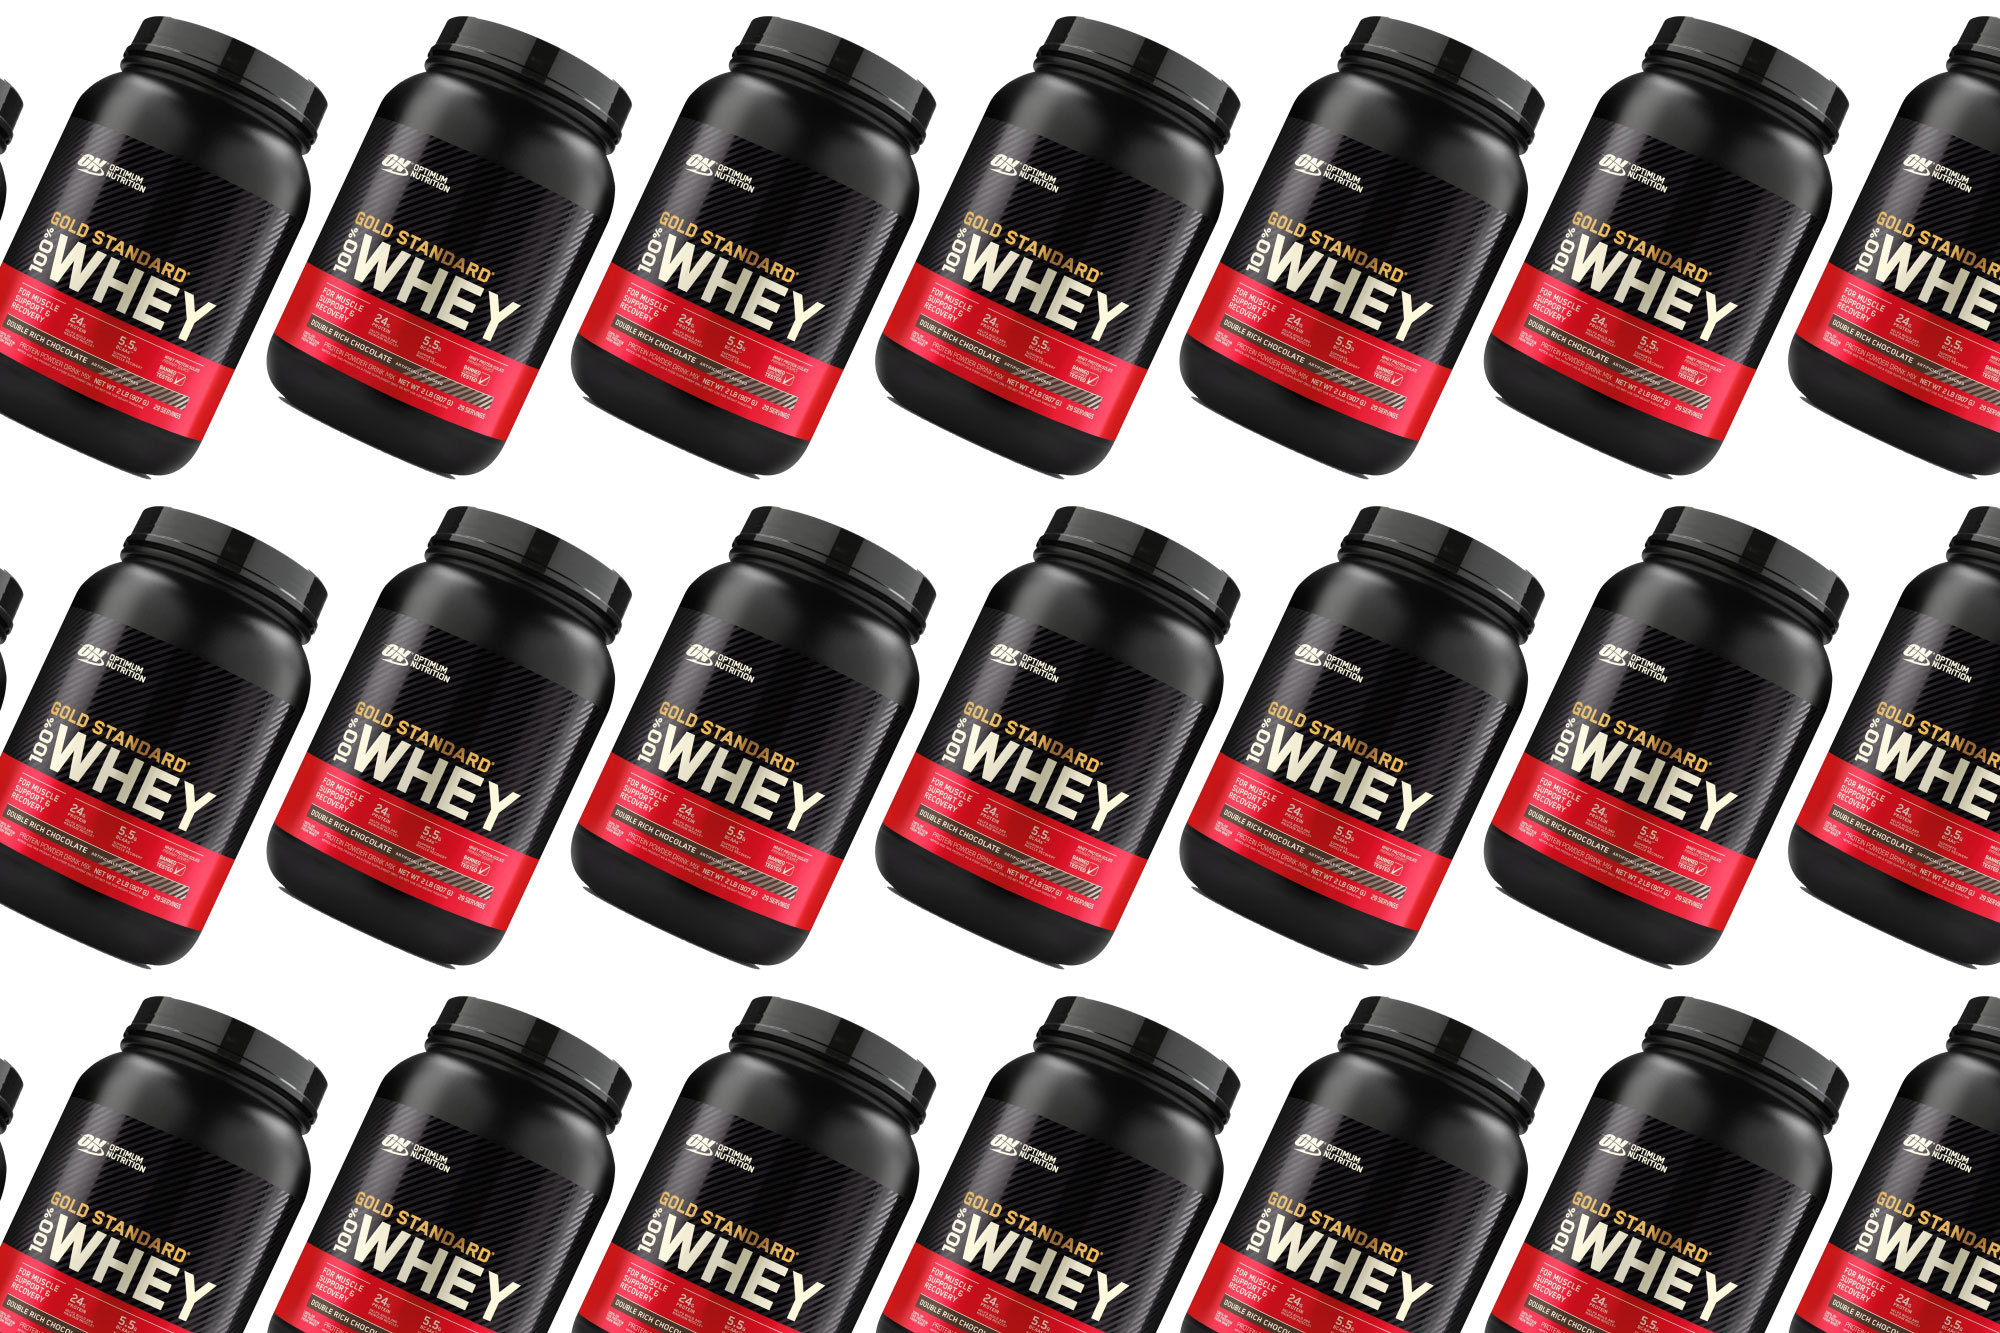 More gains, less investment: Our favorite protein powder for beginners is 30% off at Amazon